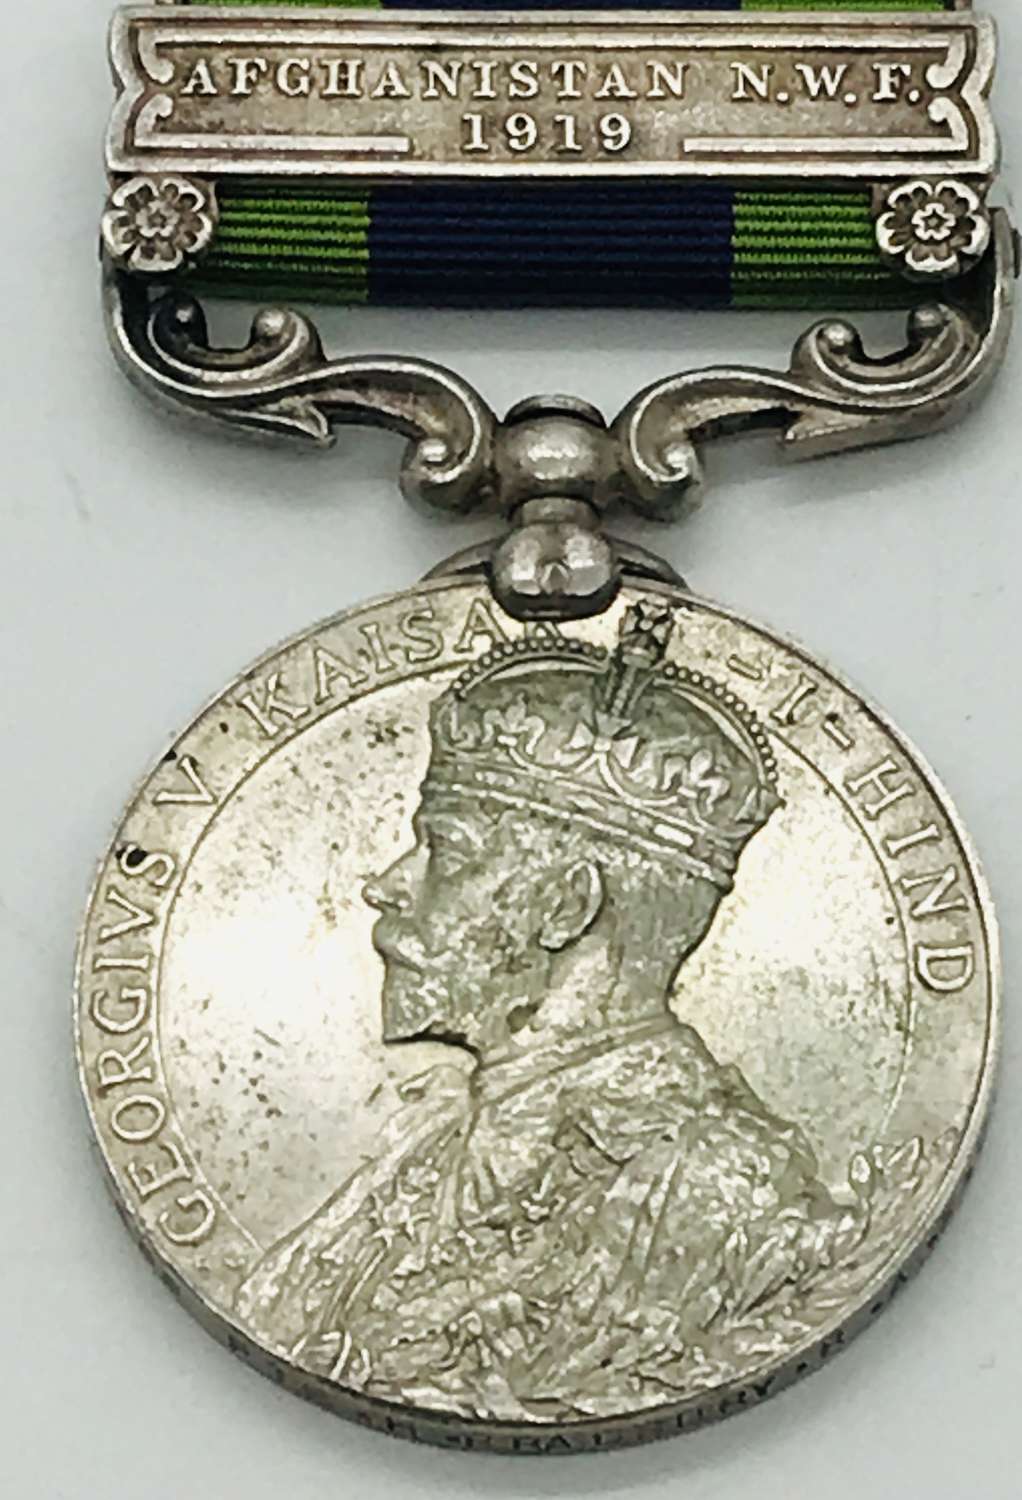 IGS medal with Afghanistan 1919 N.W.F